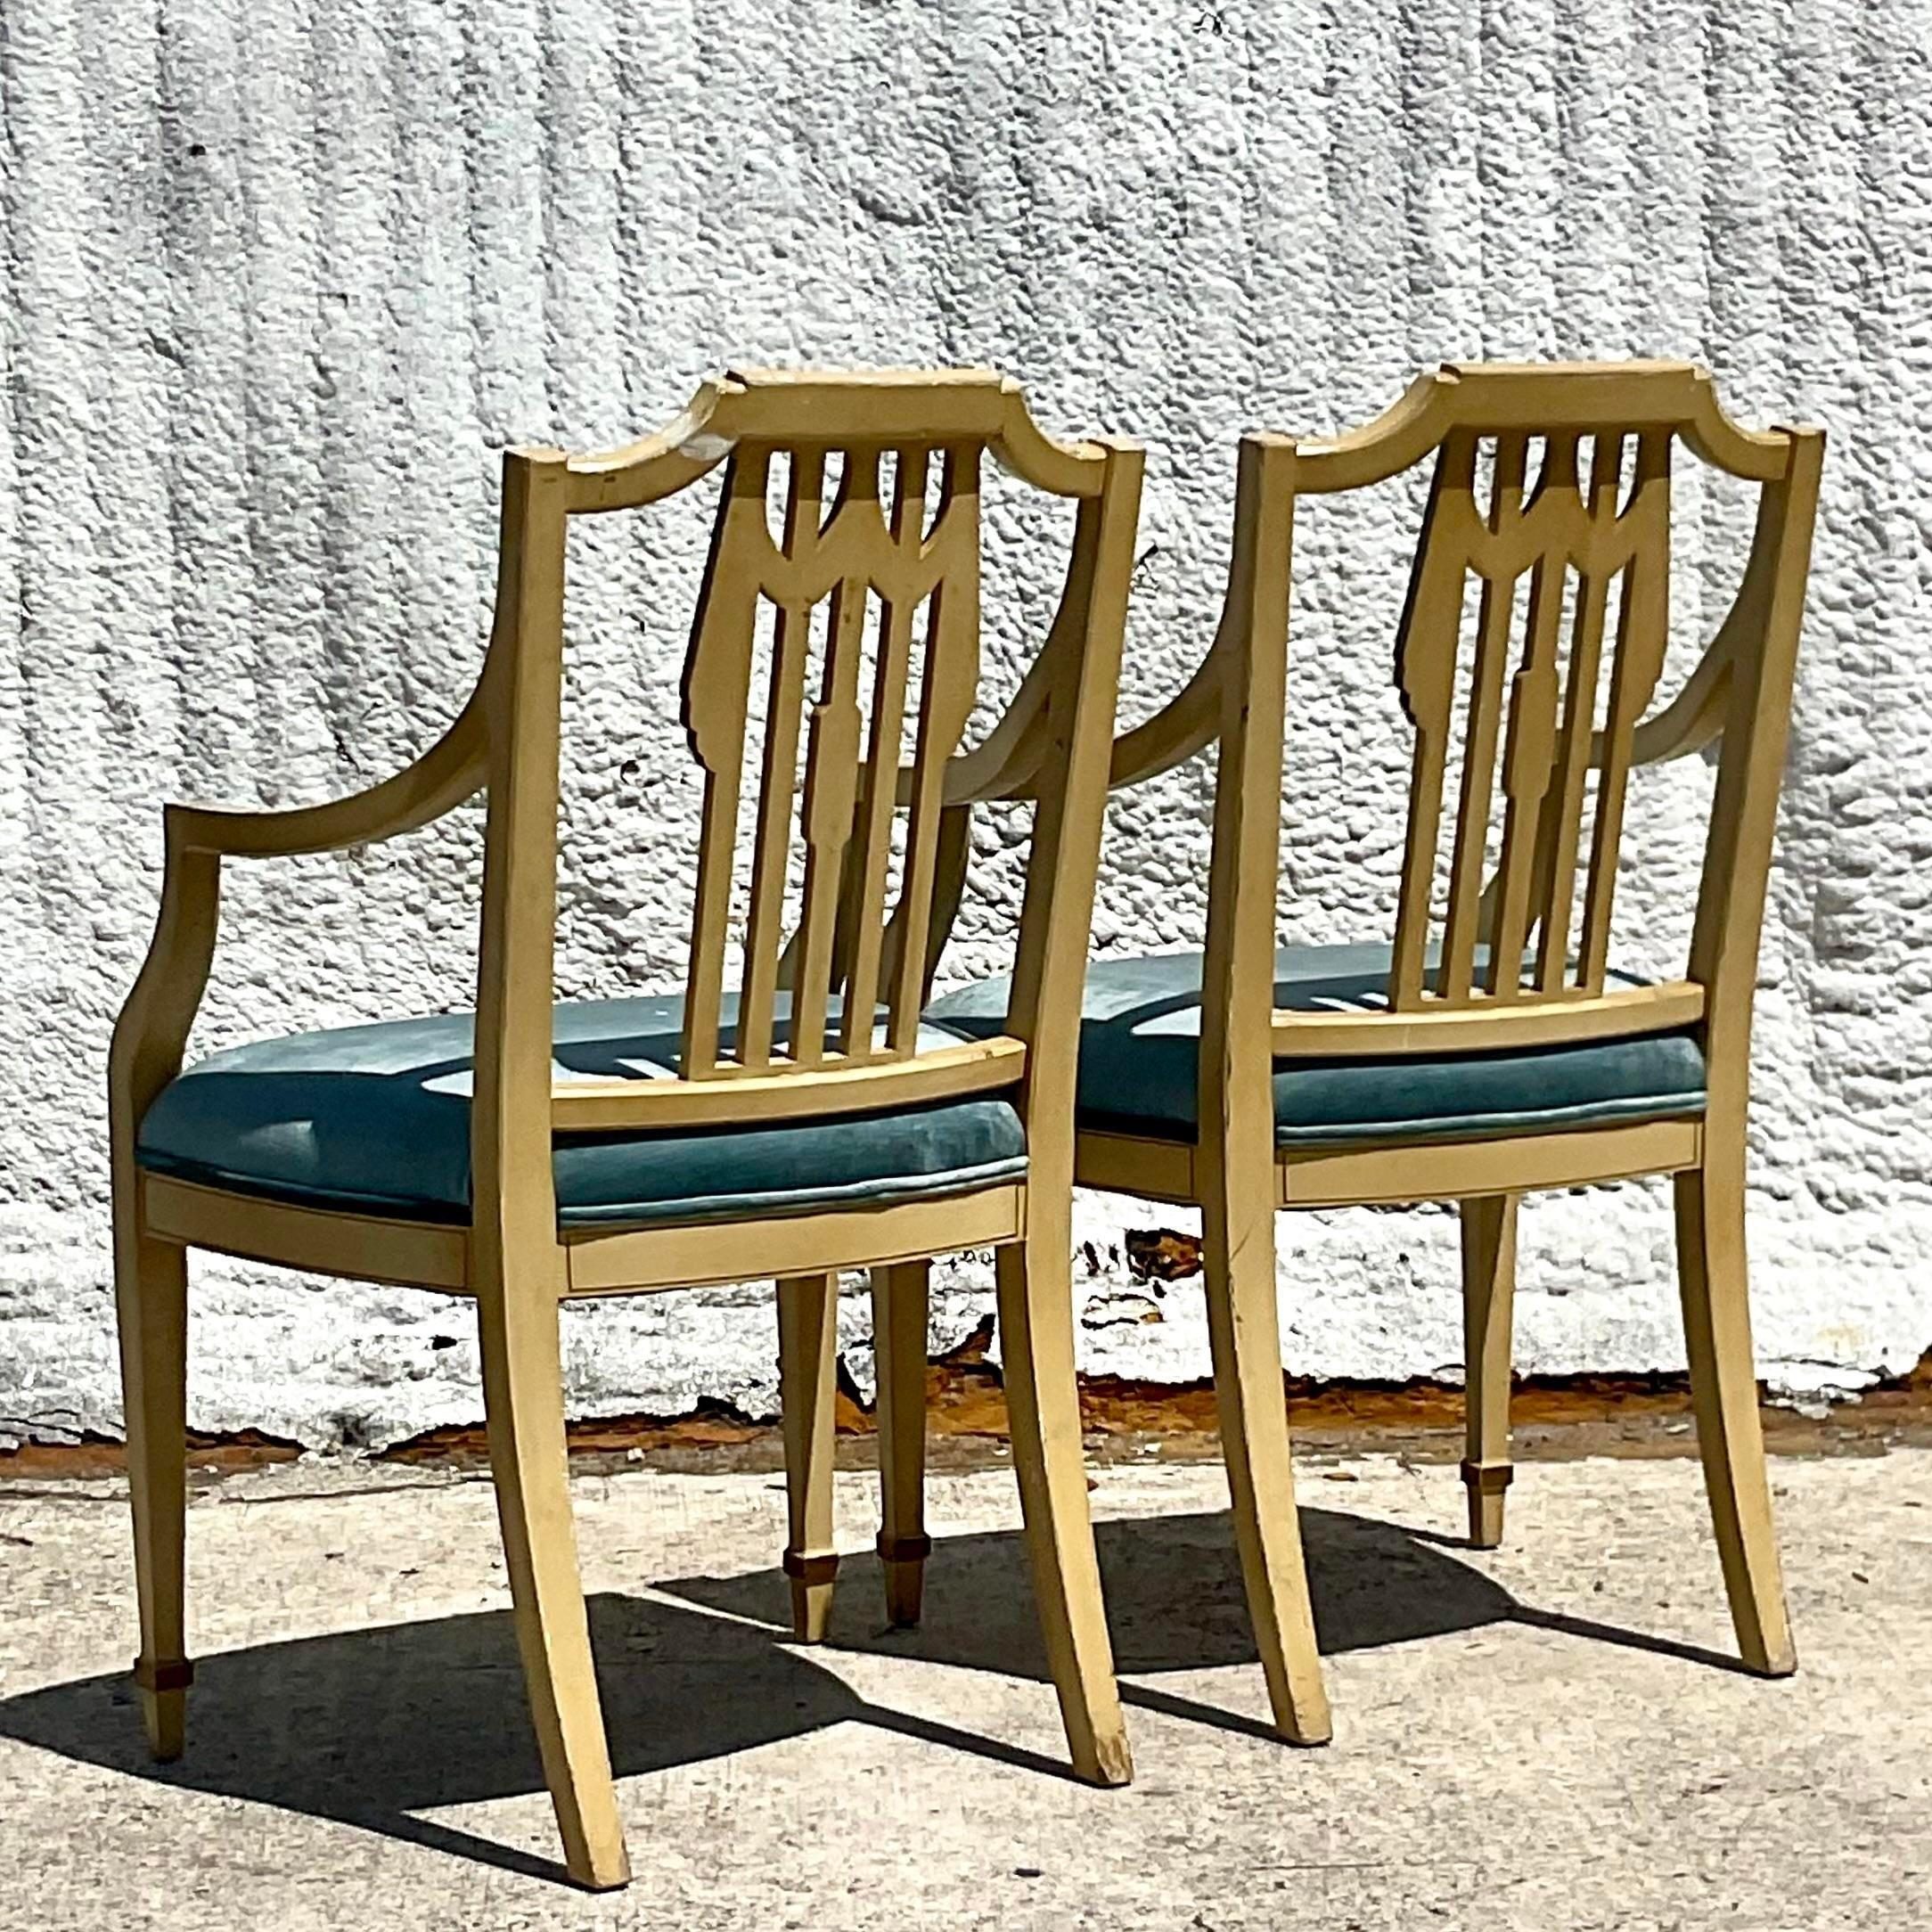 Vintage Regency Hand Painted Tromp L’oiel Swag Arm Chairs, a Pair In Good Condition For Sale In west palm beach, FL